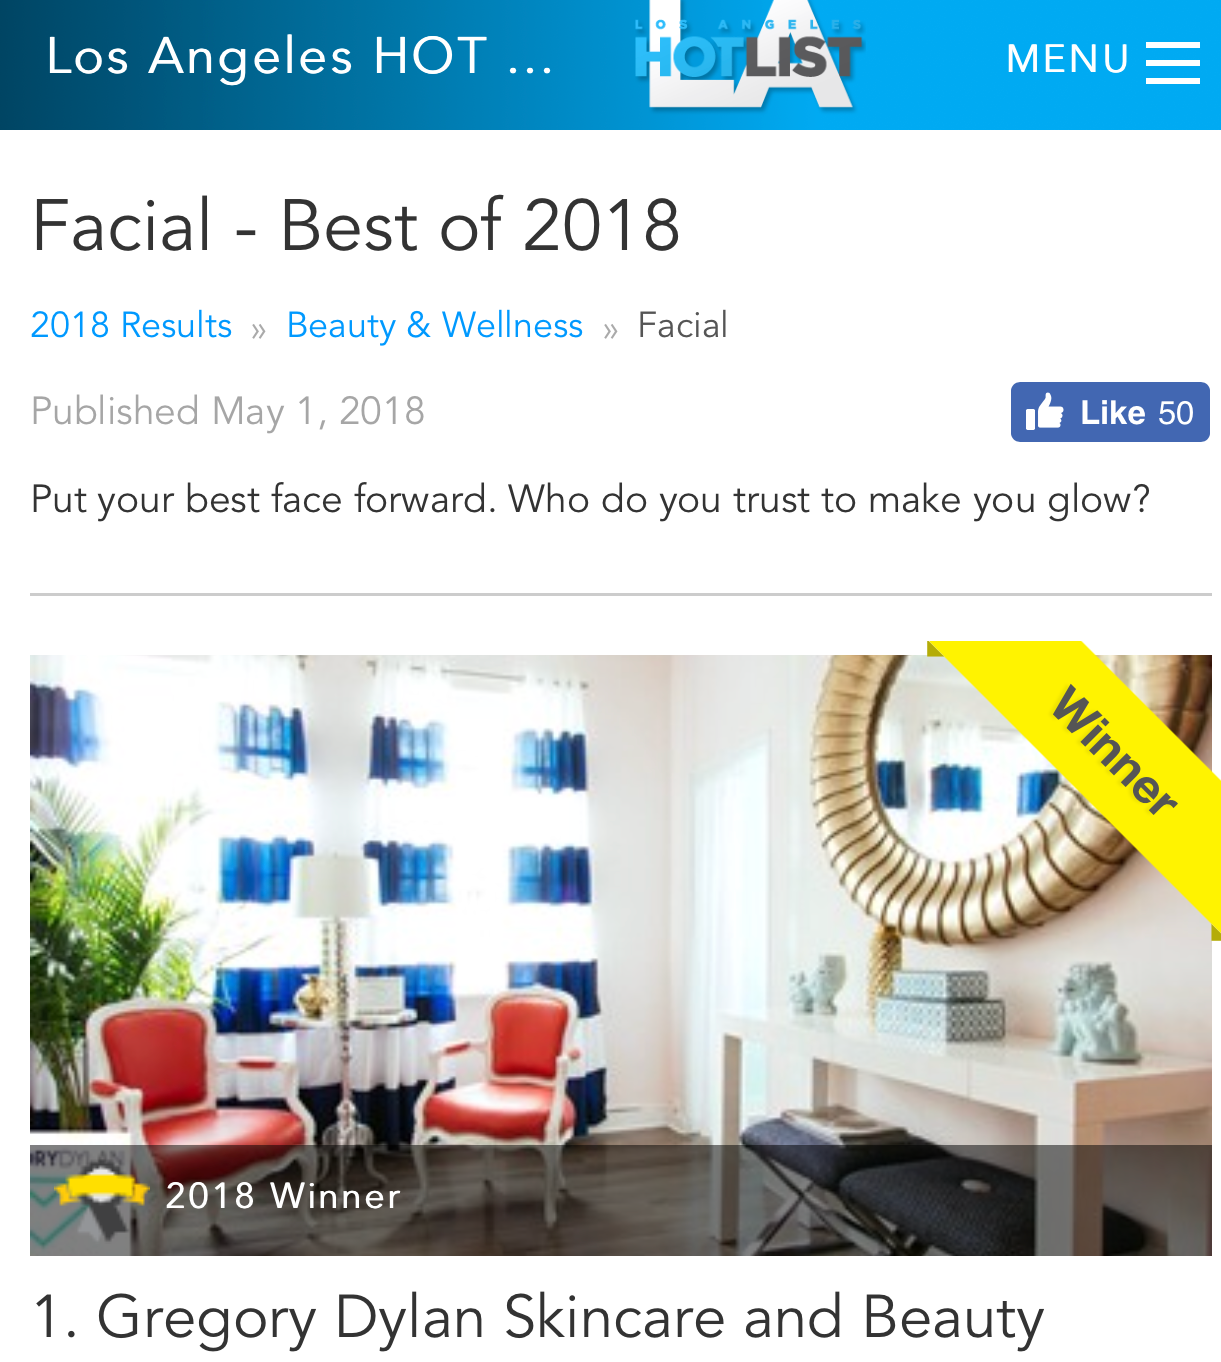 Los Angeles Hot List 2018, Best Facial: Gregory Dylan